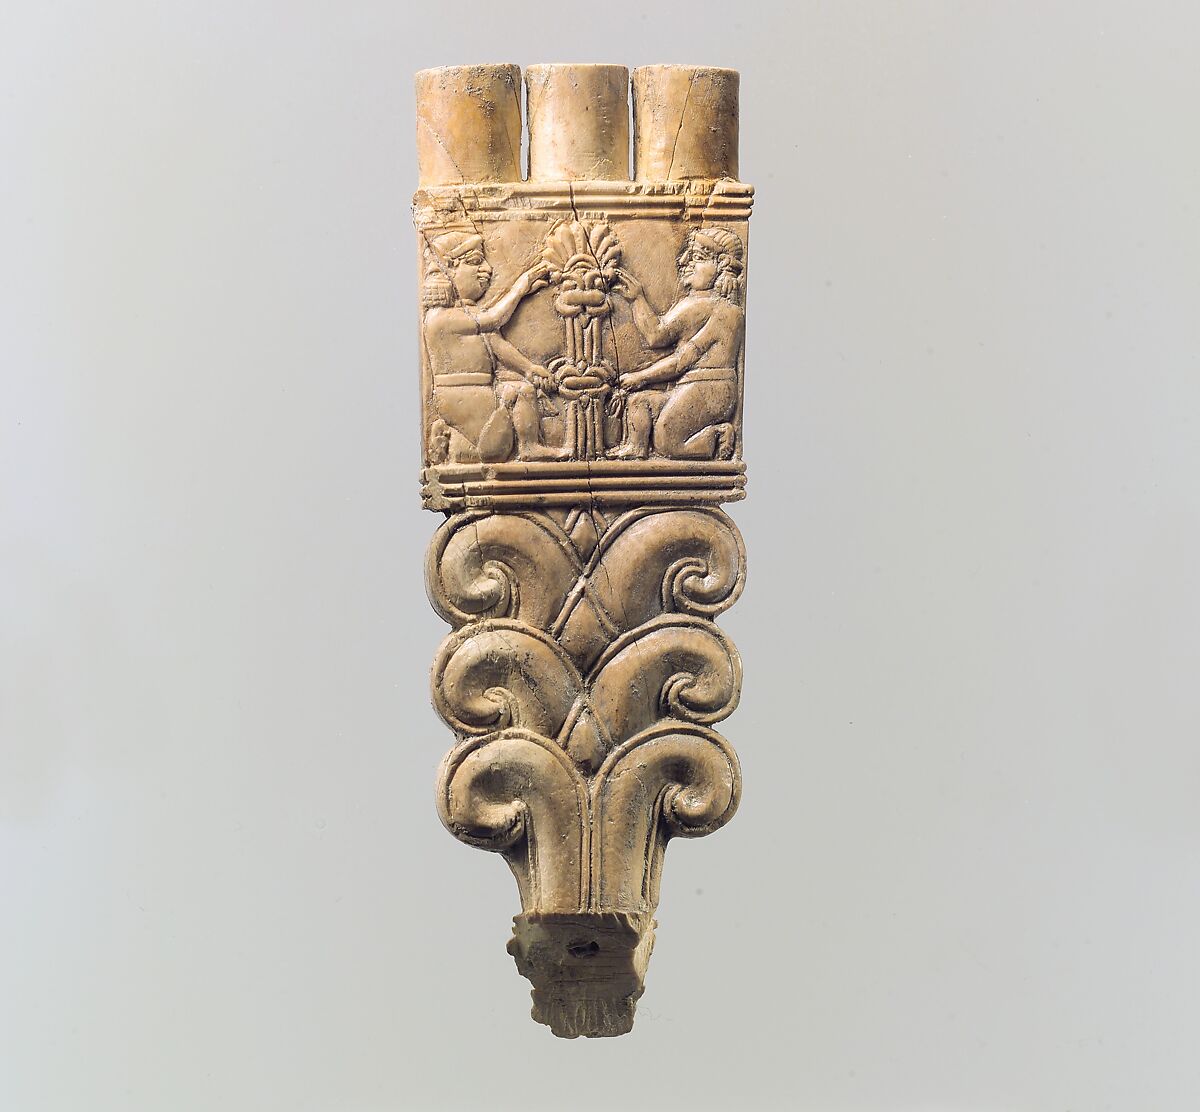 Handle of a flywhisk or fan, Ivory, Assyrian